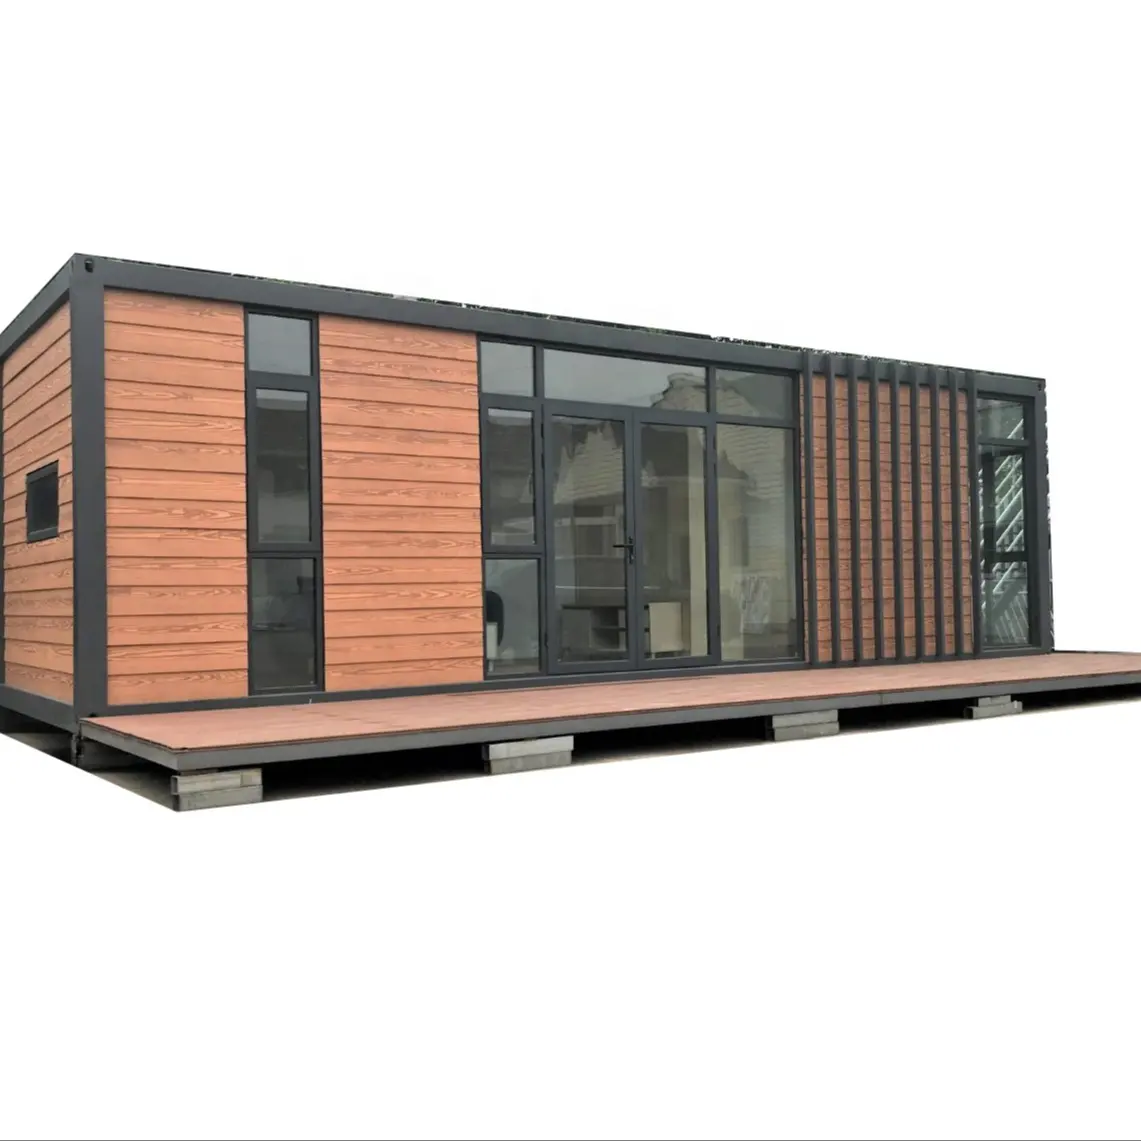 Luxury Prefabricated High Quality Cheap Prefab Folding Portable Container House Luxury 3 Bedrooms With Bathroom And Kitchen